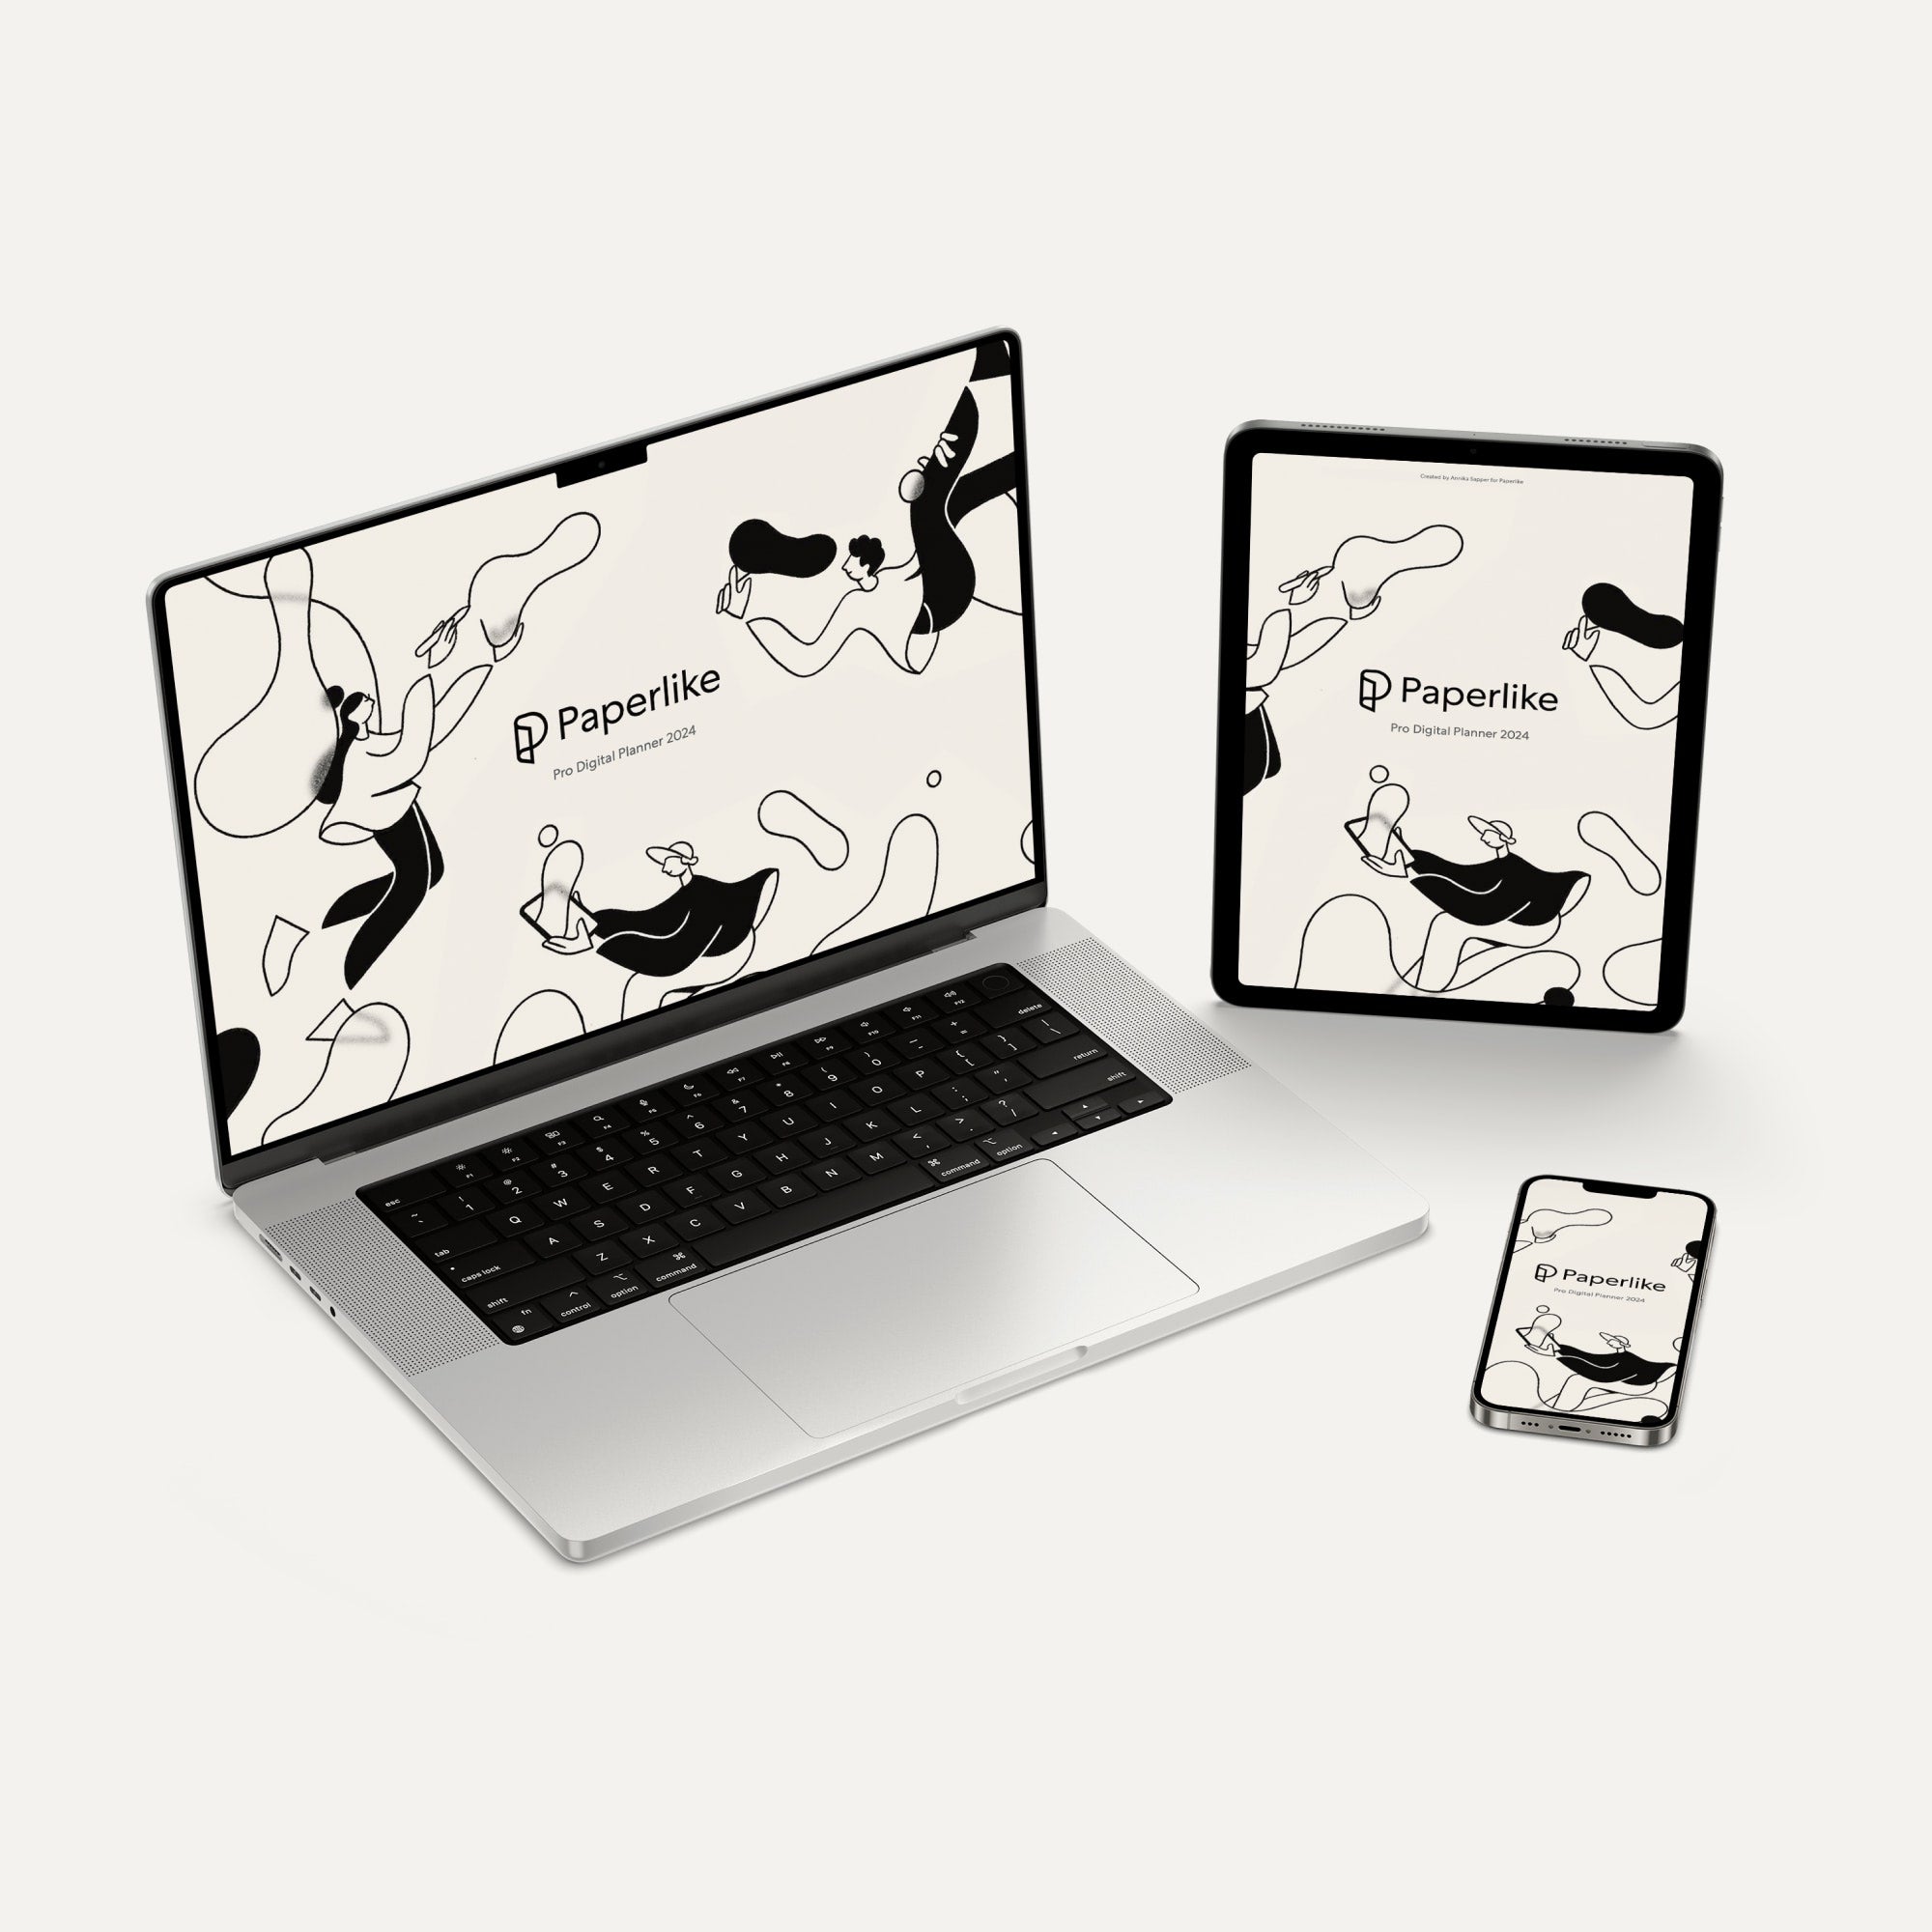 Paperlike logos and branding displayed on laptop, iPad and mobile phone